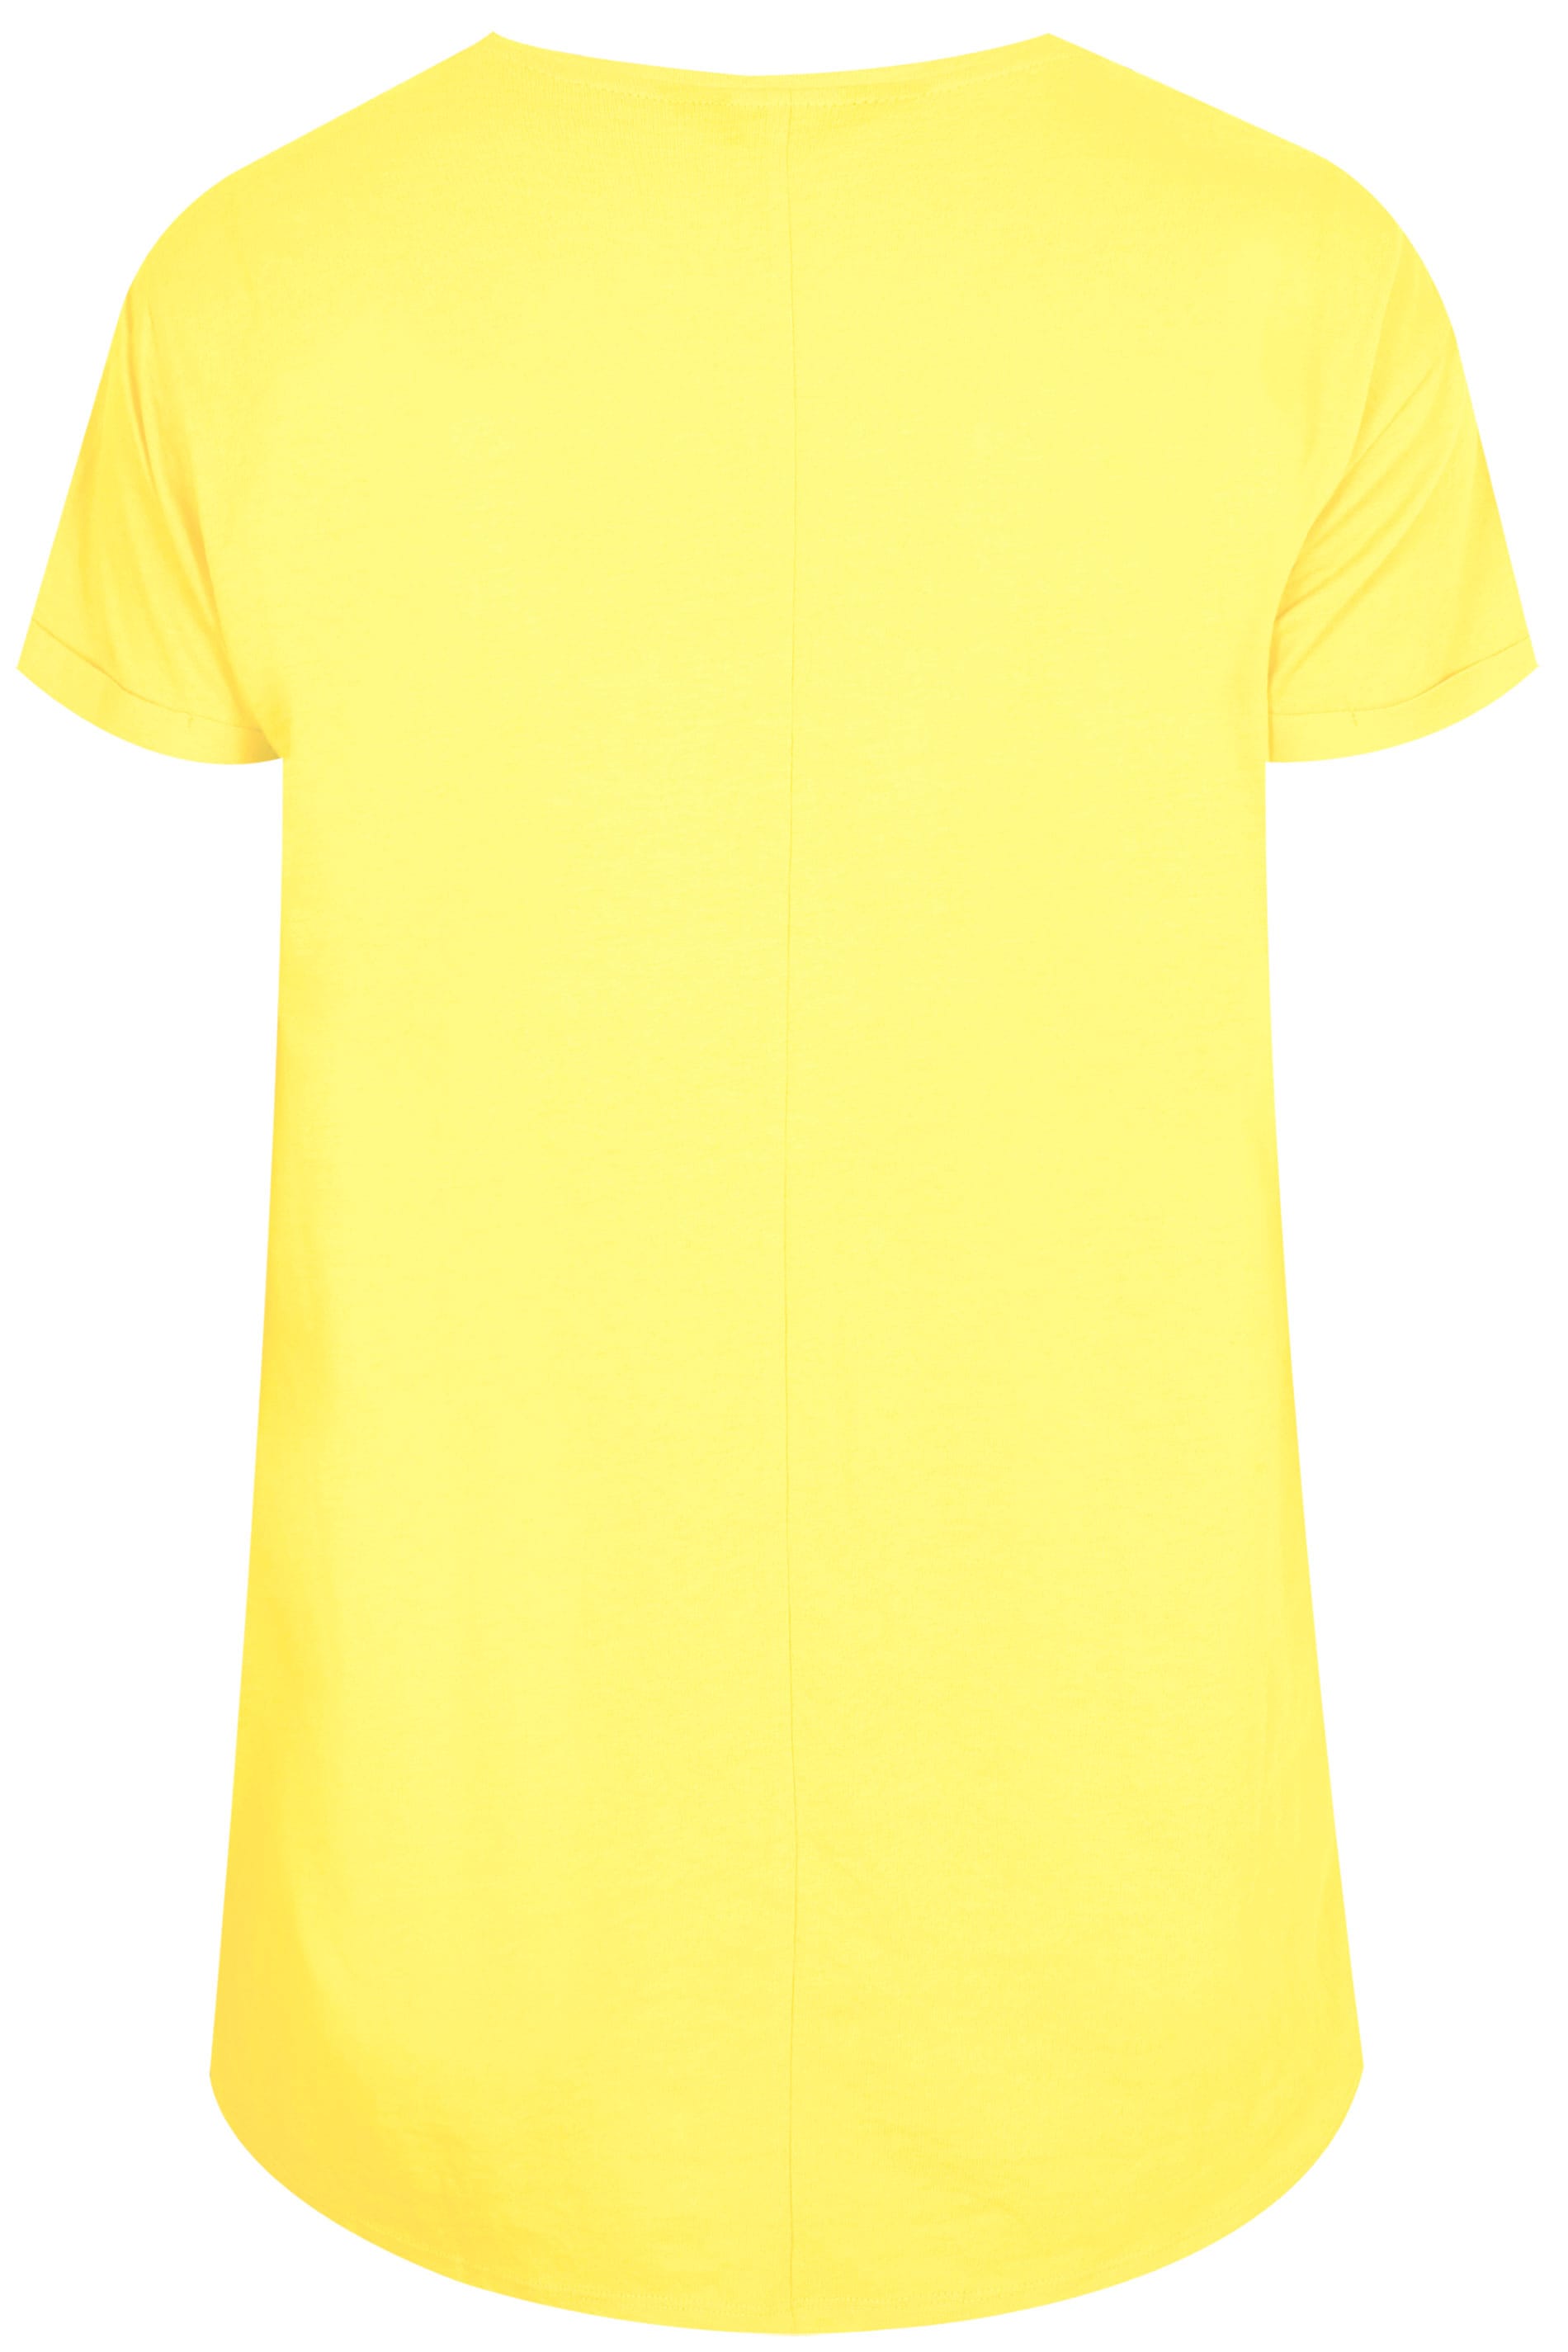 Yellow Mock Pocket T-Shirt | Plus Sizes 16 to 36 | Yours ...